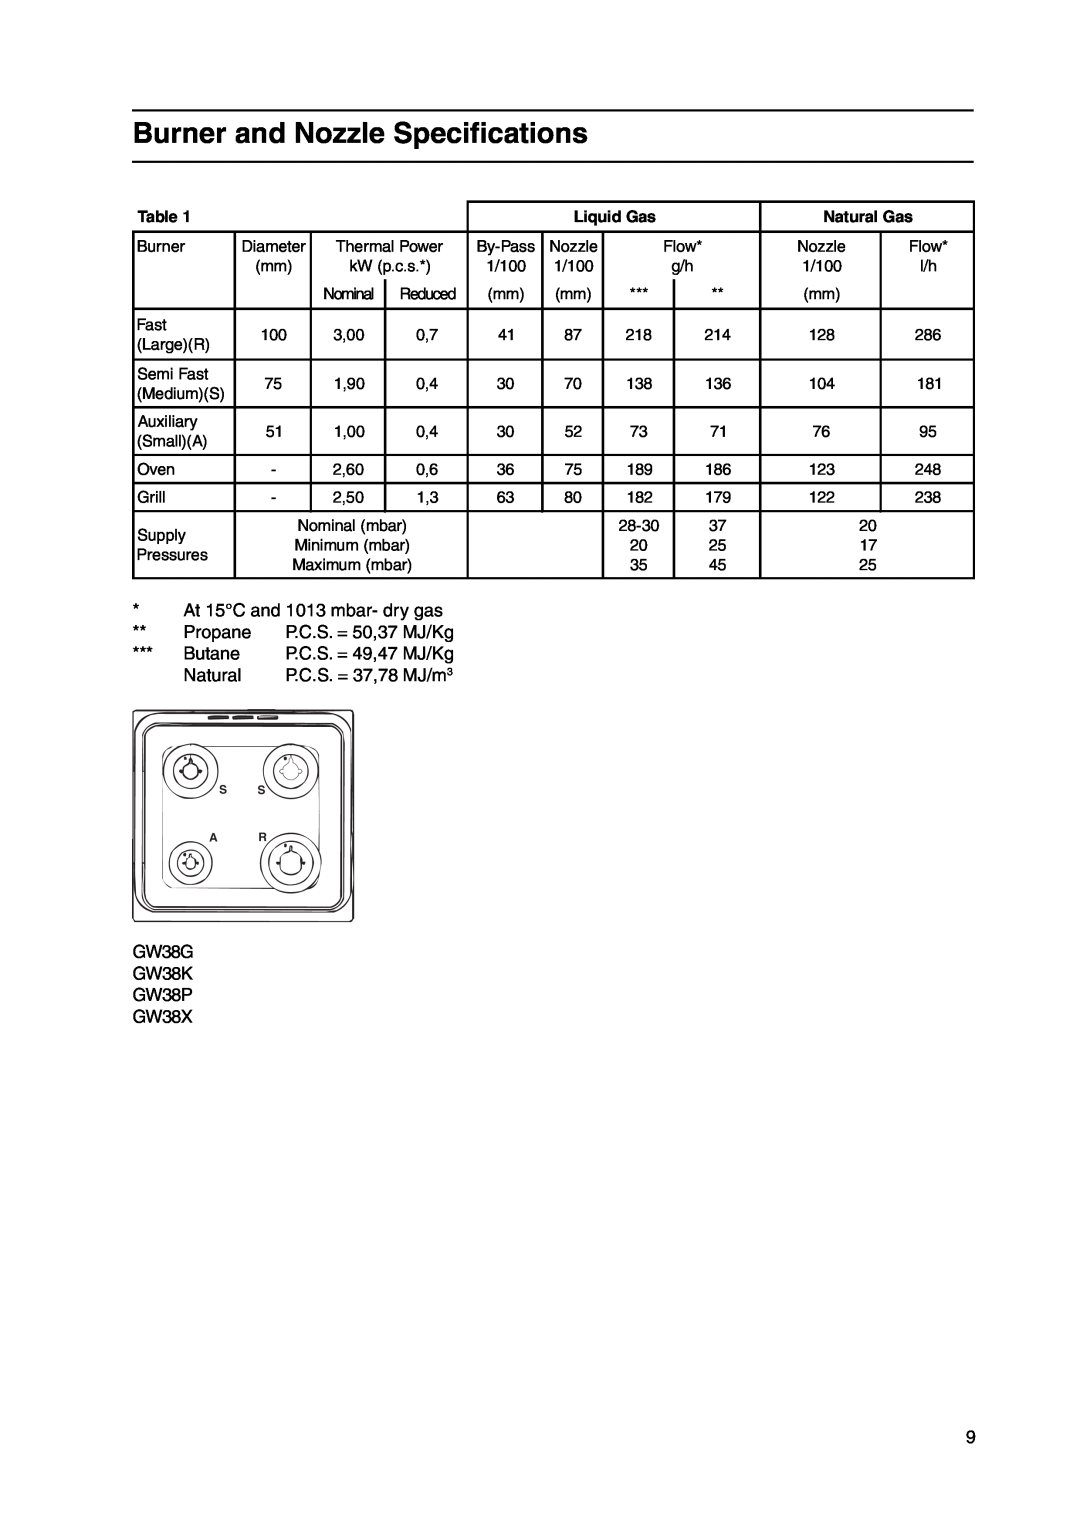 Hotpoint GW38G manual Burner and Nozzle Specifications, At 15C and 1013 mbar- dry gas, Propane, Butane, Natural, Liquid Gas 